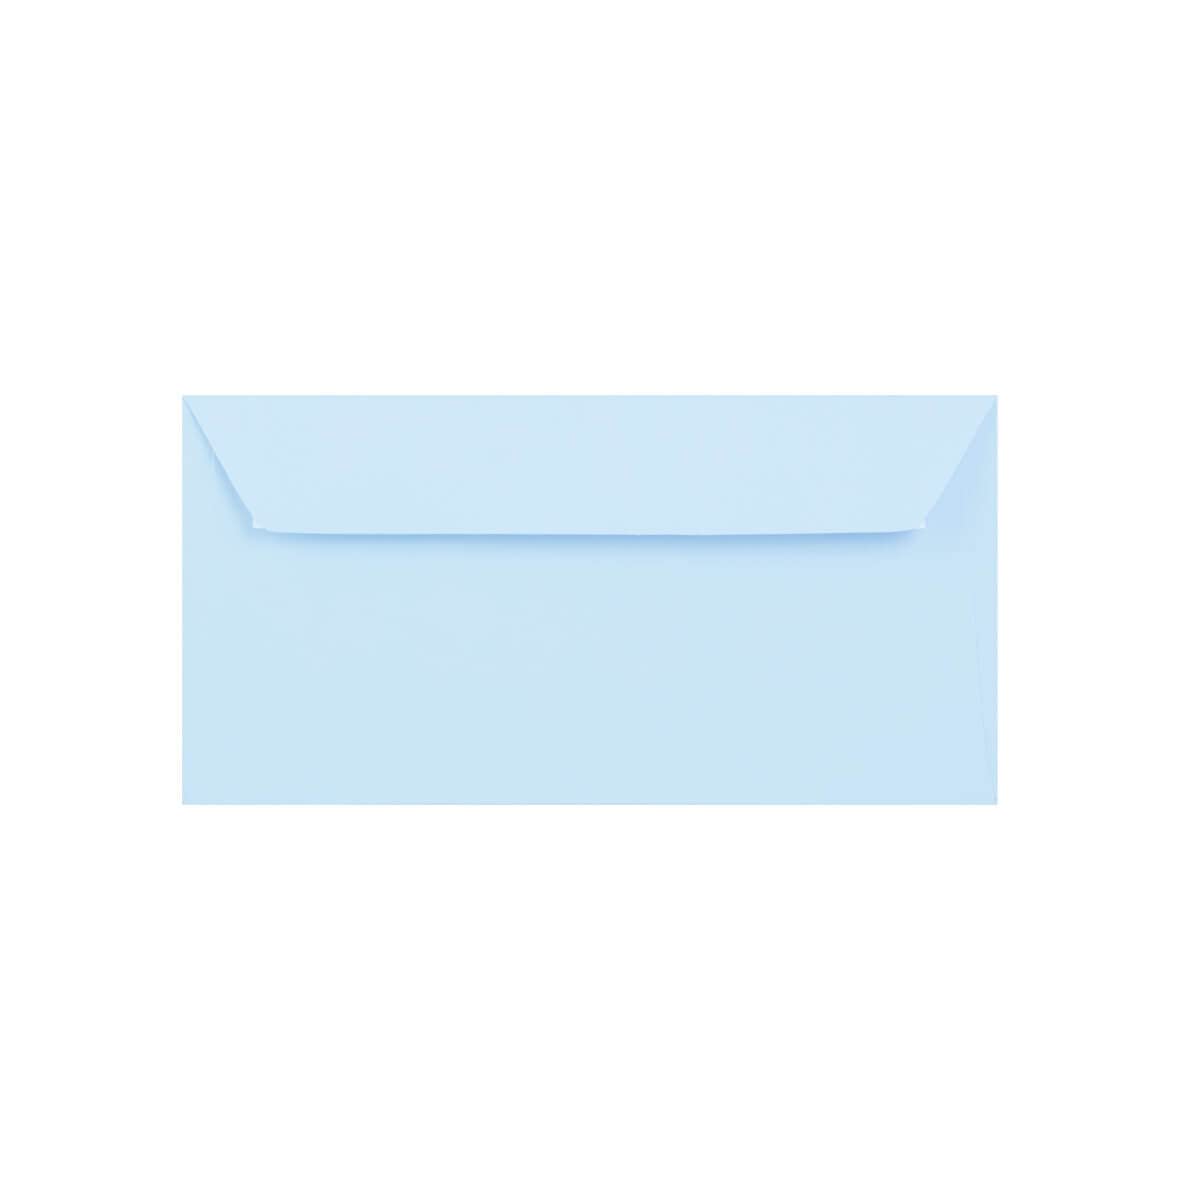 DL Coloured Envelopes for Greeting Cards Wedding Invitations & Crafts (110x220mm) Pack of 100 (Light Blue Peel & Seal)